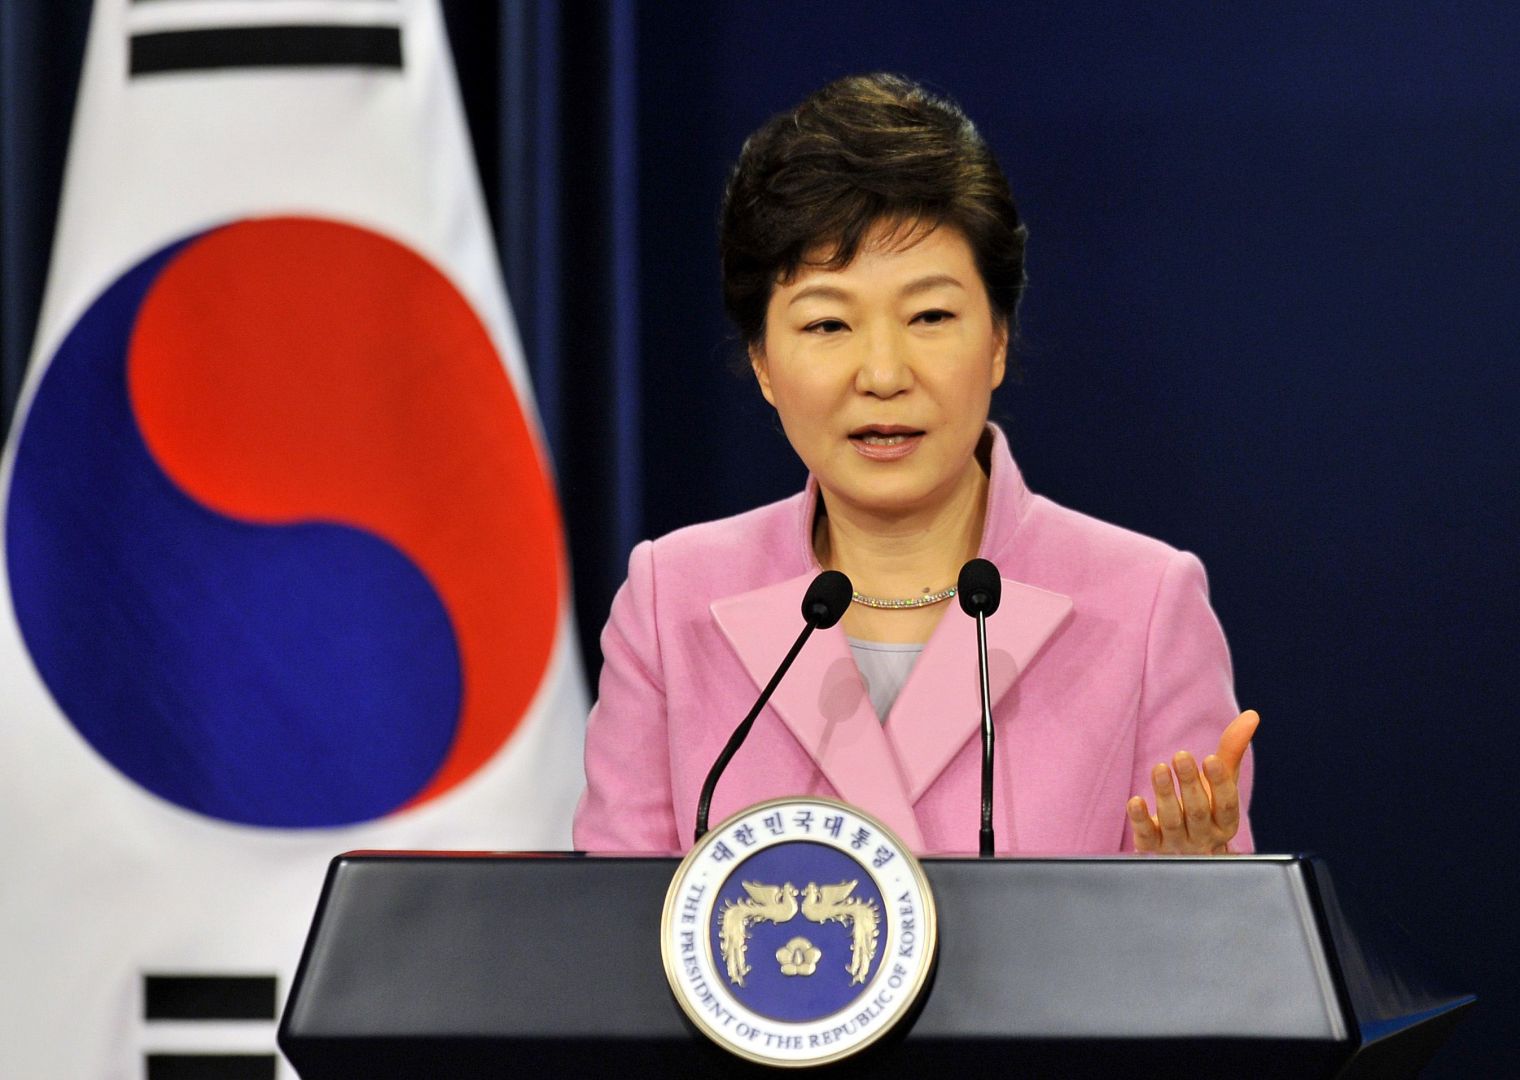 S. Korea’s Park Tells North to Abandon Nuclear Weapons